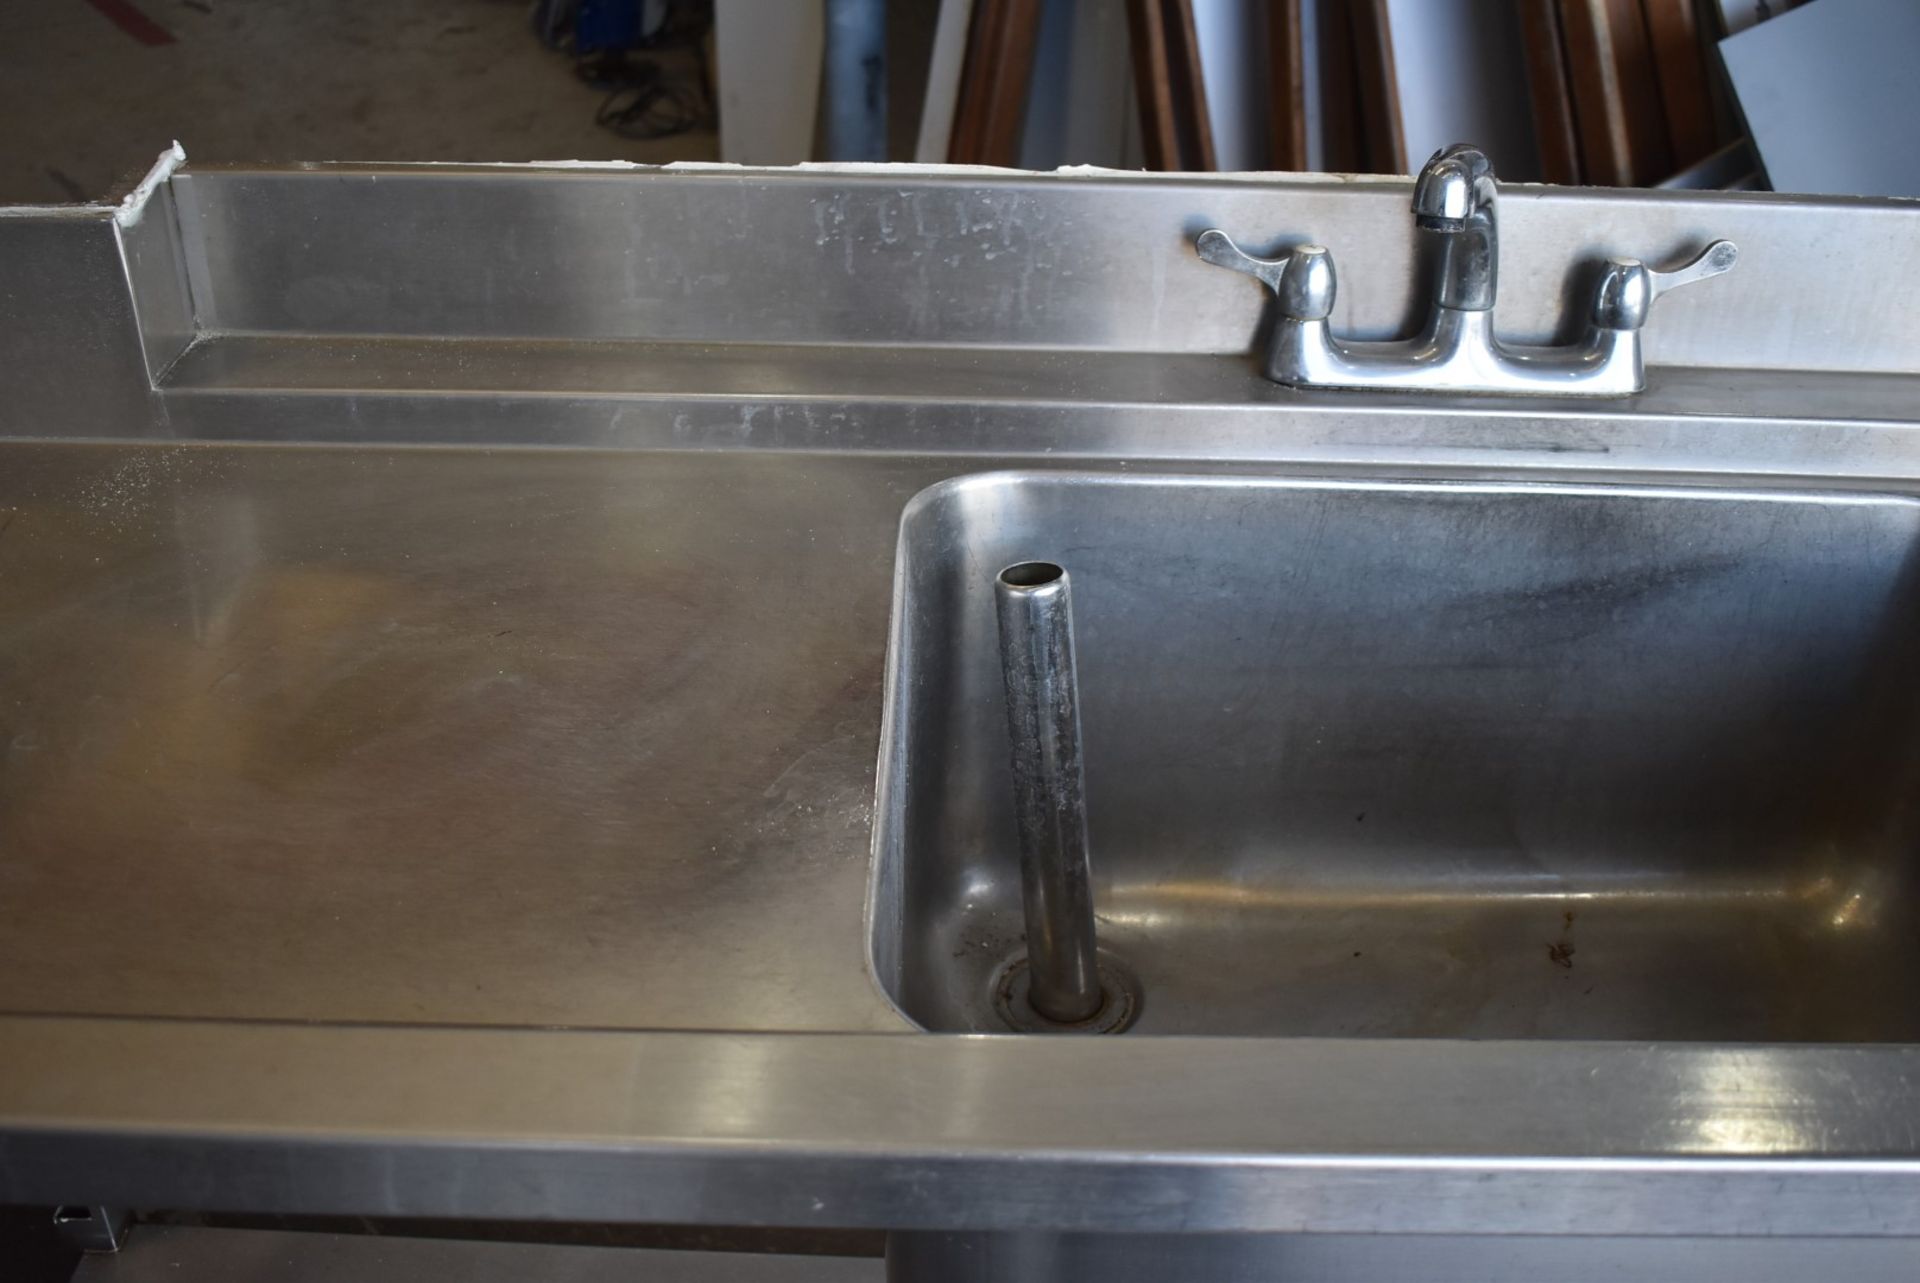 1 x Stainless Steel Wash Unit With Single Basin, Mixer Tap, Undershelf, Corner Upstand - Width 190cm - Image 9 of 11